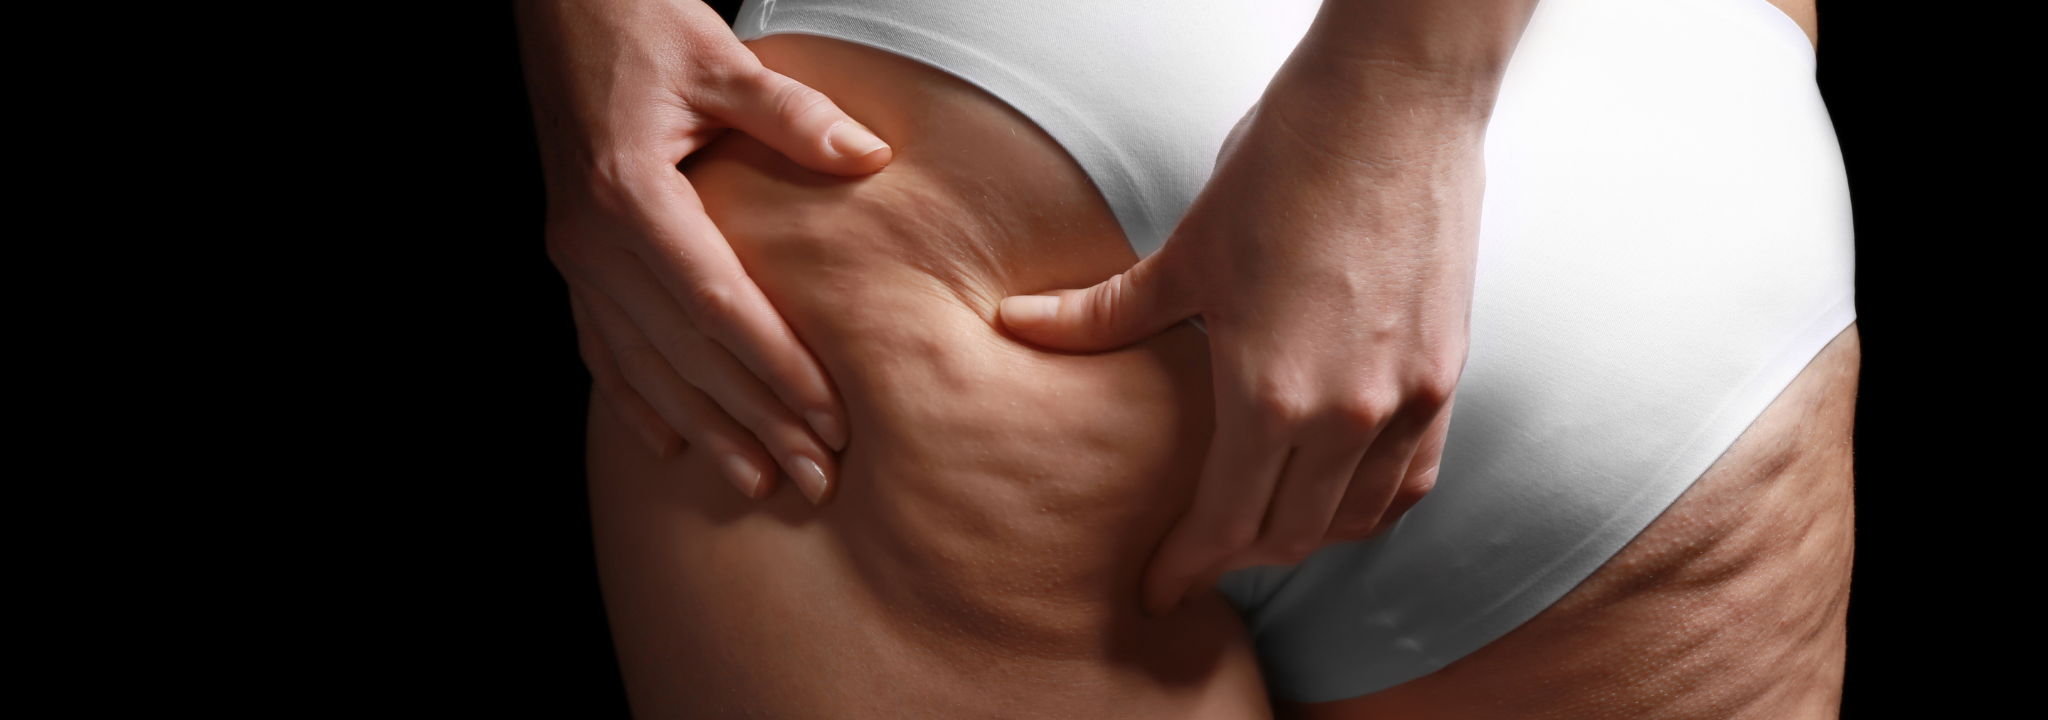 4 Ways to Ease Your Cellulite Woes